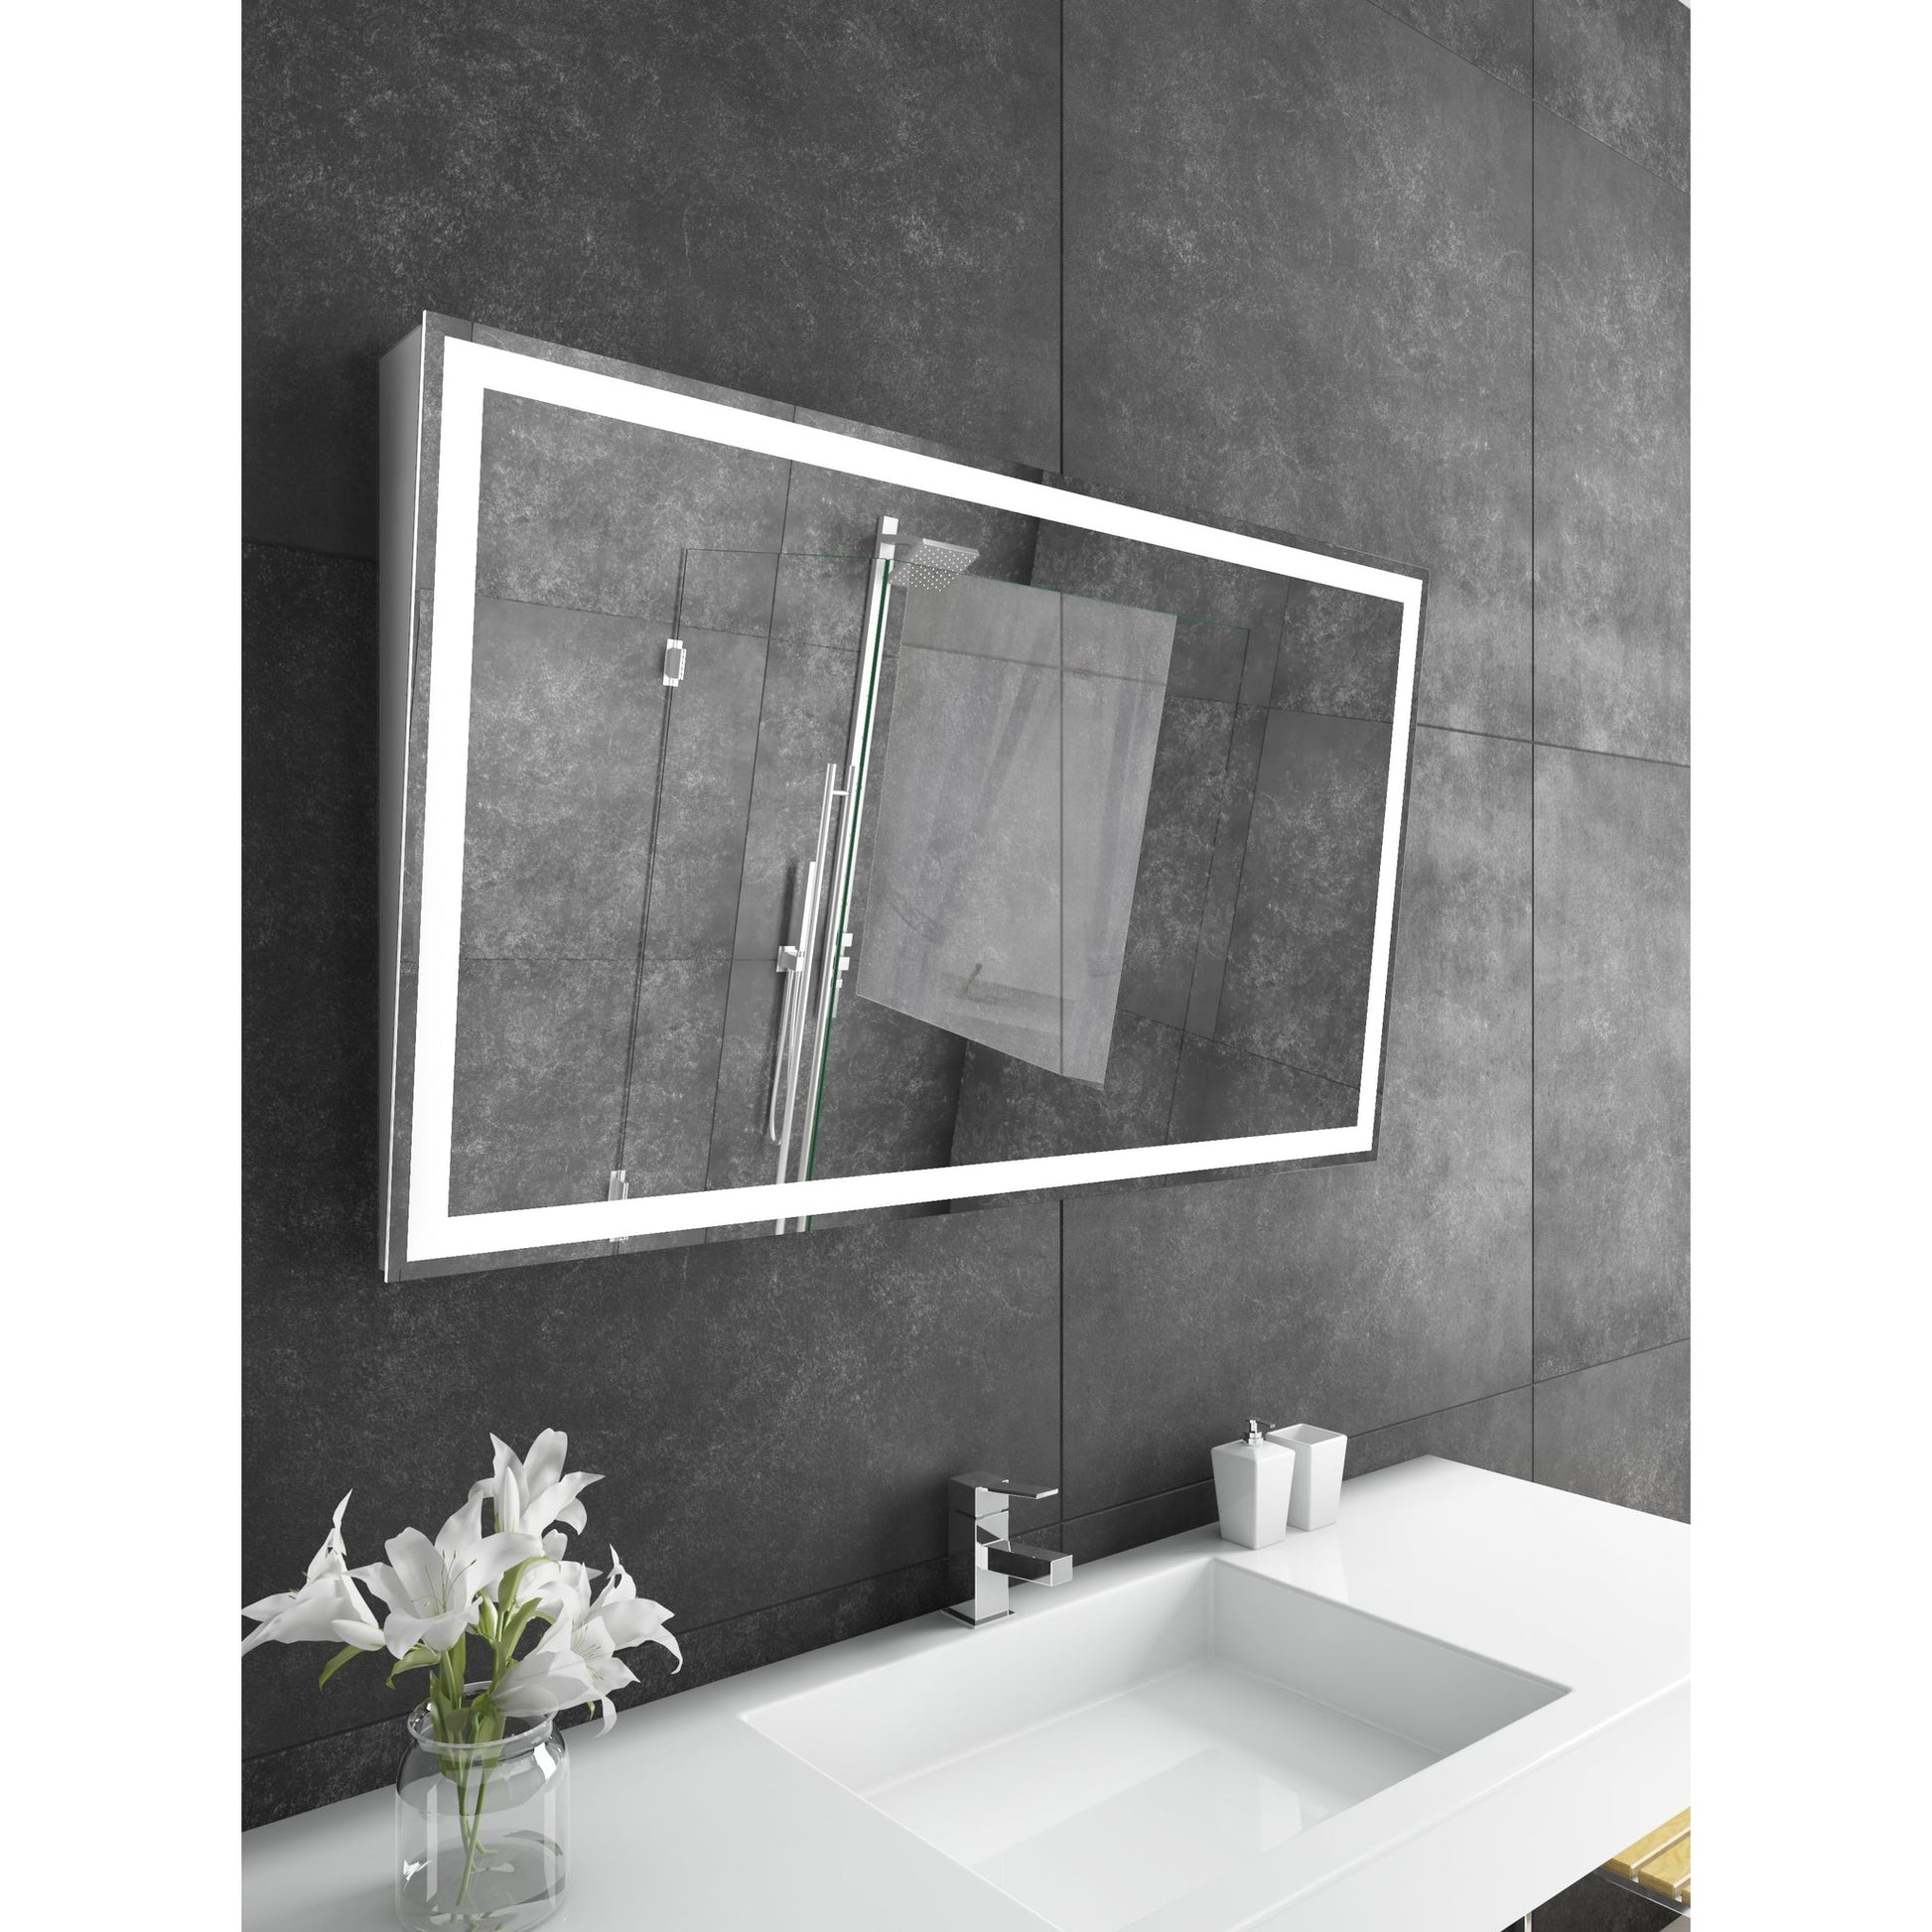 Paris Mirror Adira 48" x 28" Silver Front-Lit Lighted Super Bright Dimmable Wall-Mounted 6000K LED Mirror With Tilted Top Frame